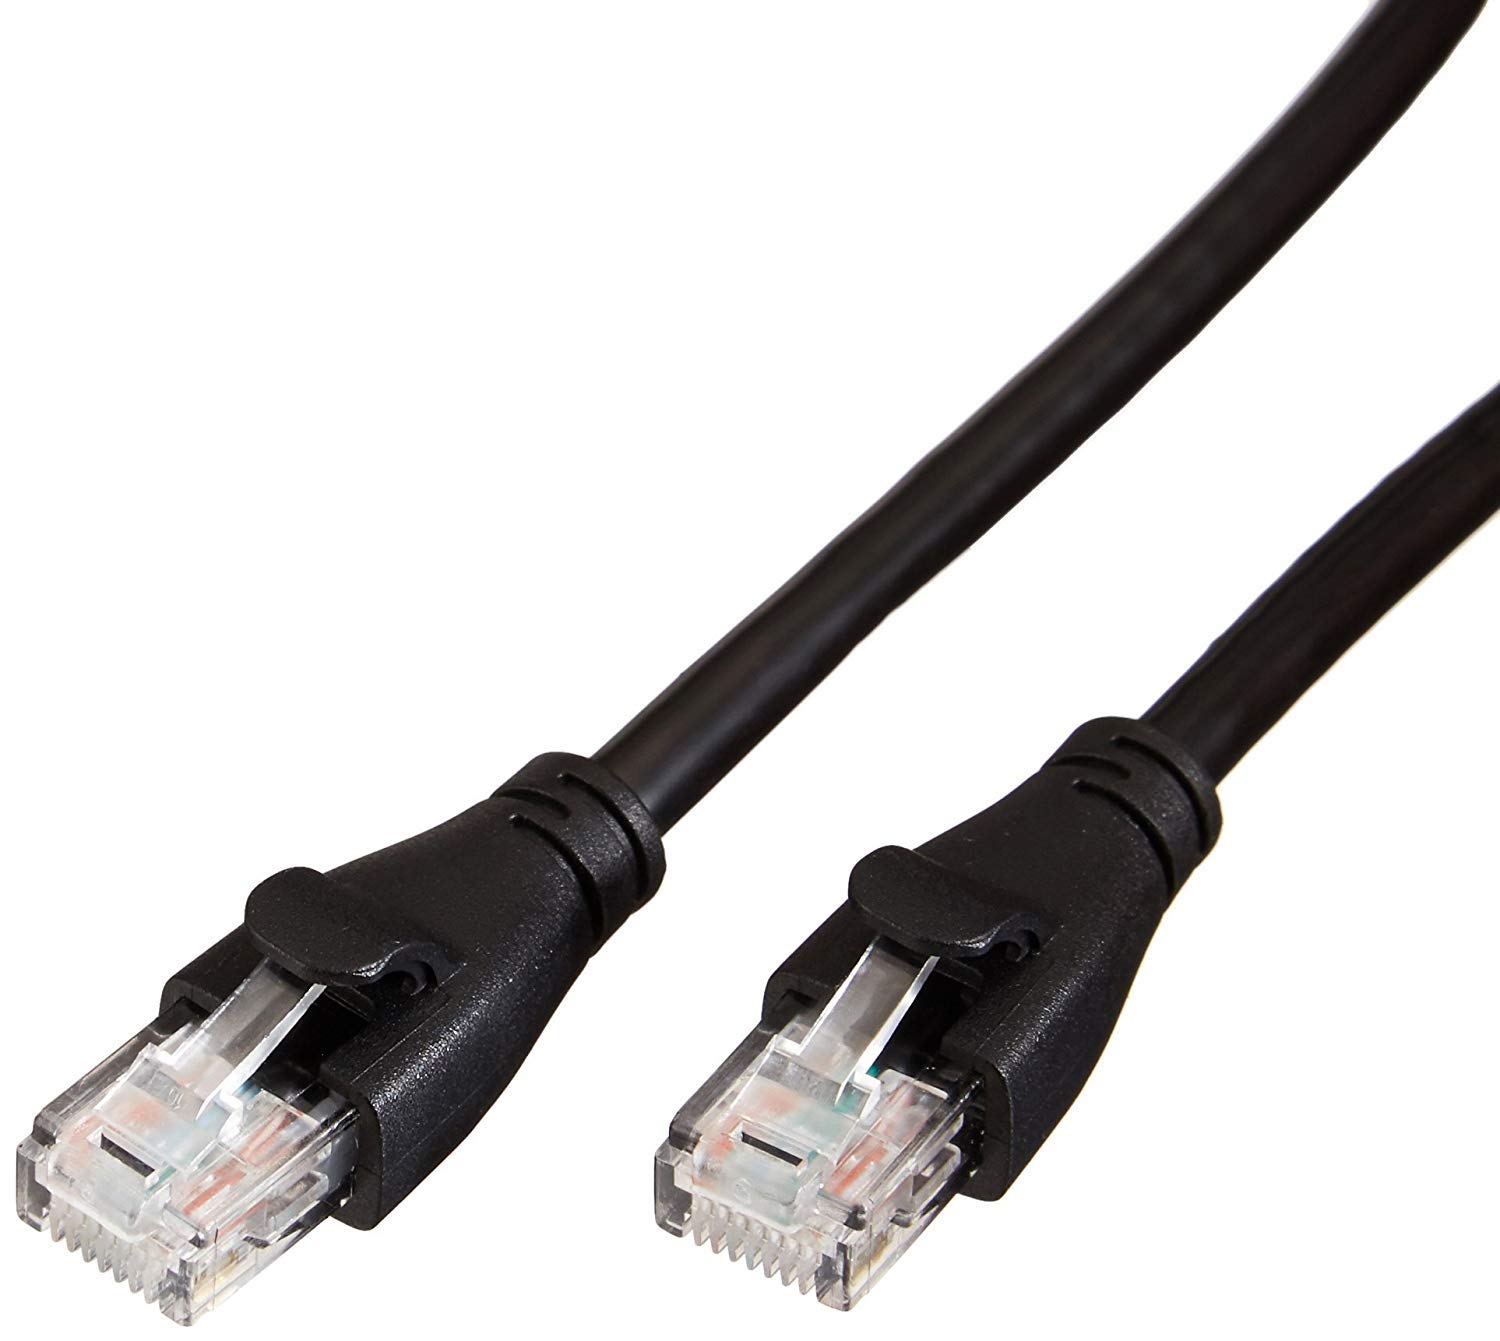 Basics RJ45 Cat-6 Ethernet Patch/LAN Cable for Personal